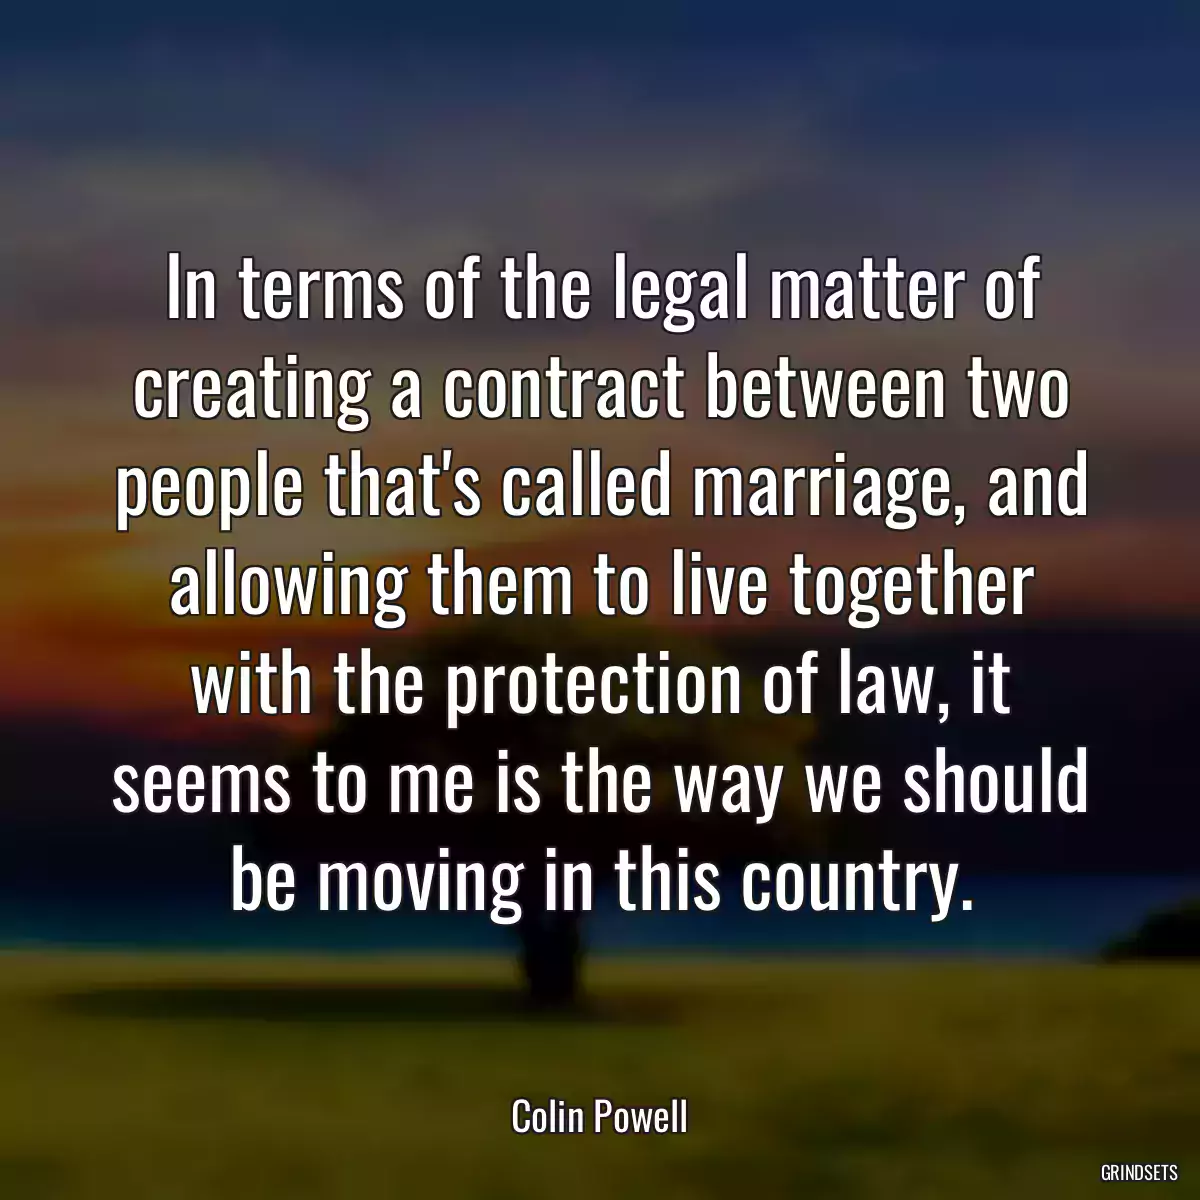 In terms of the legal matter of creating a contract between two people that\'s called marriage, and allowing them to live together with the protection of law, it seems to me is the way we should be moving in this country.